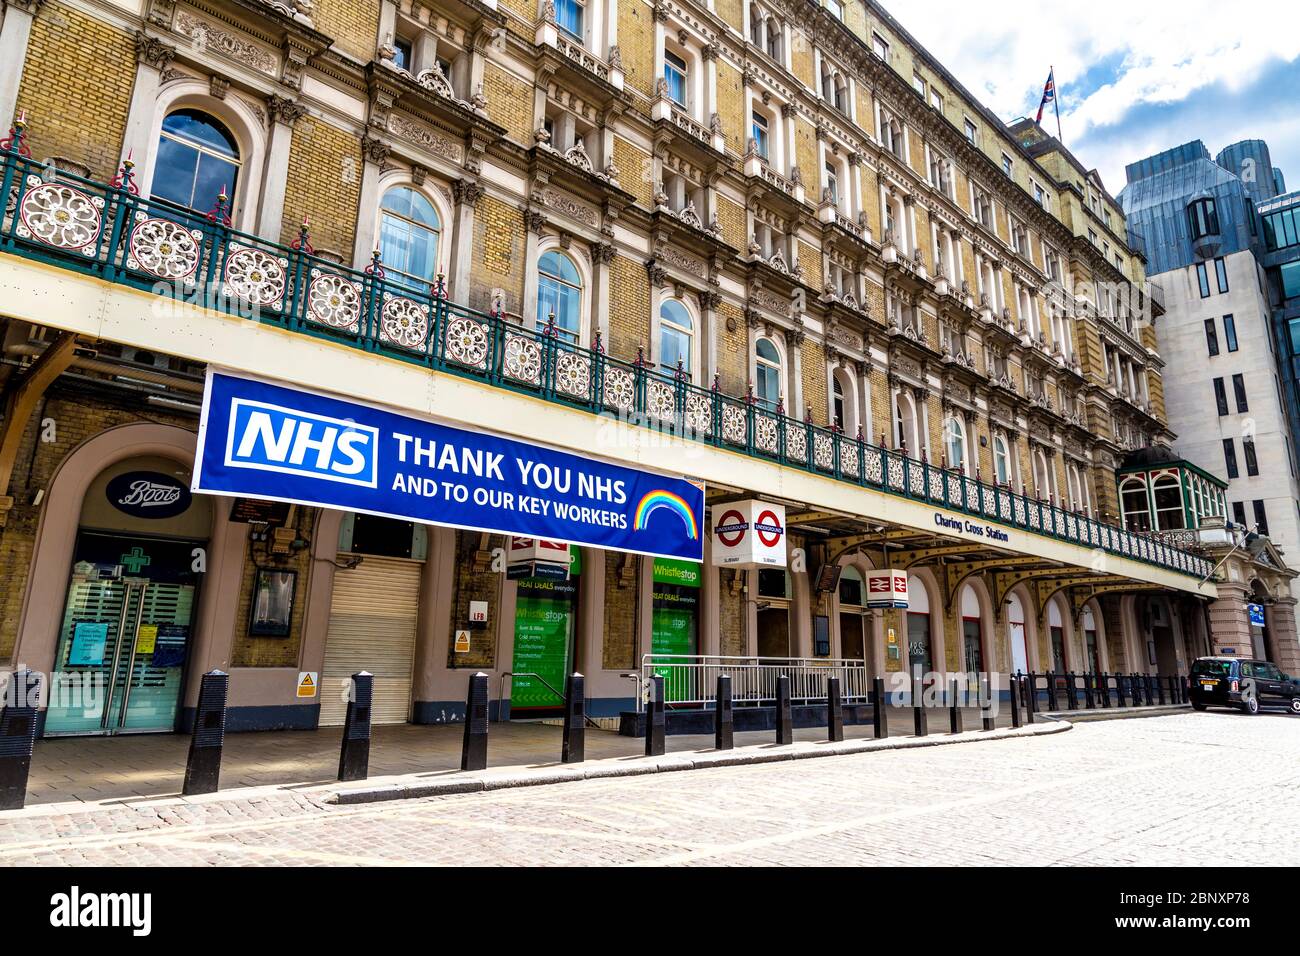 16 May 2020 London, UK - Thank you message banner to NHS nurses, doctors and key workers on the facade of Charing Cross Station during the Coronavirus pandemic lockdown Stock Photo